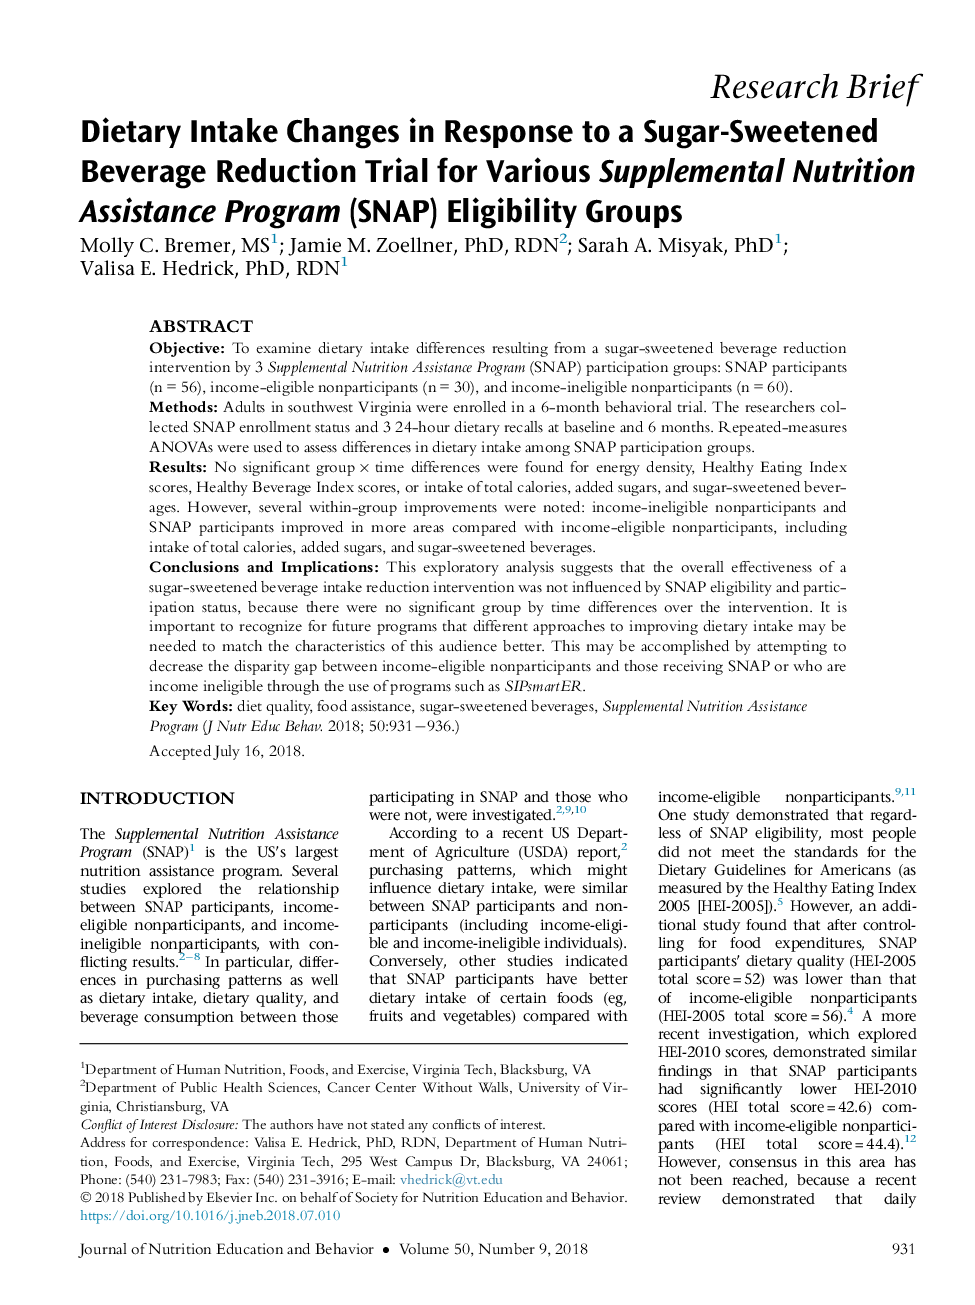 Dietary Intake Changes in Response to a Sugar-Sweetened Beverage Reduction Trial for Various Supplemental Nutrition Assistance Program (SNAP) Eligibility Groups